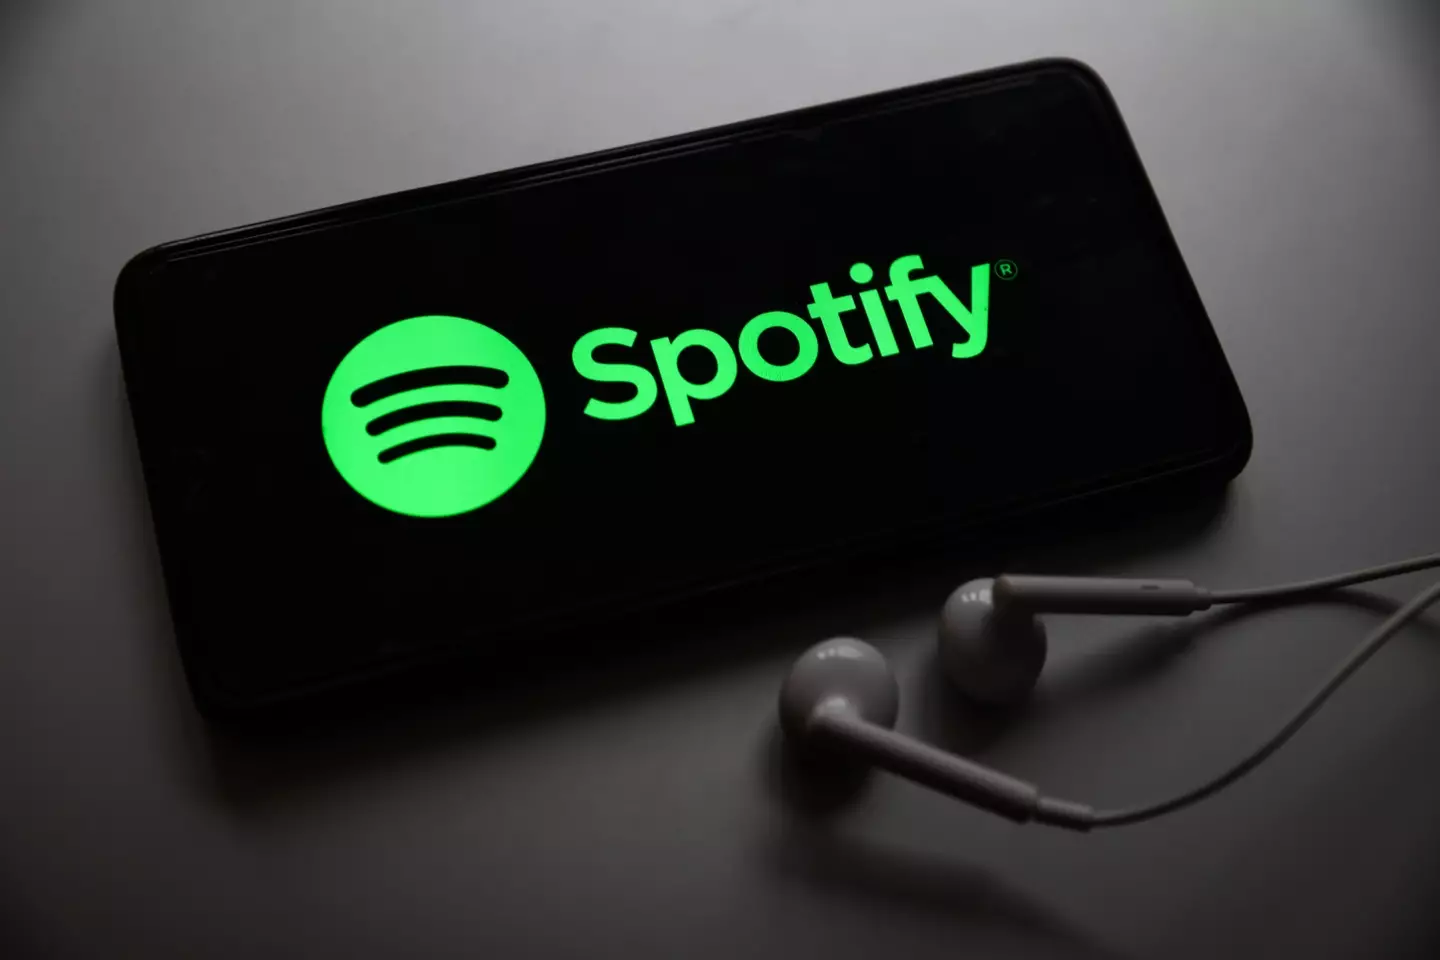 Spotify says  it depends on the artist's agreement with their label regarding how much they're paid.